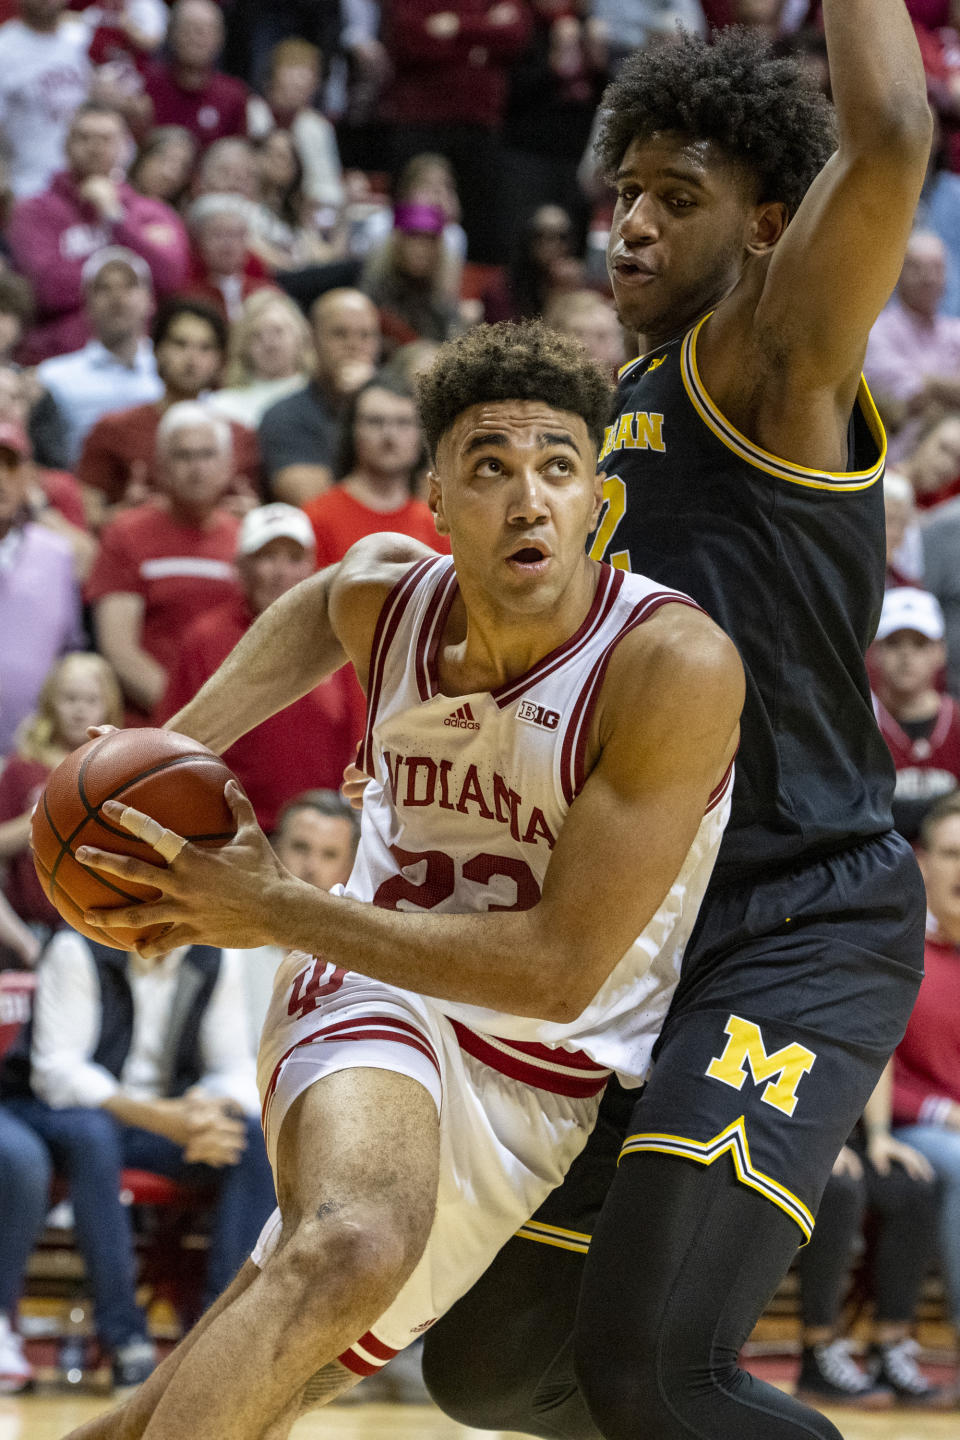 Indiana forward Trayce Jackson-Davis drives along the baseline while being defended by Michigan forward Tarris Reed Jr. (32) during an overtime period of an NCAA college basketball game, Sunday, March 5, 2023, in Bloomington, Ind. (AP Photo/Doug McSchooler)